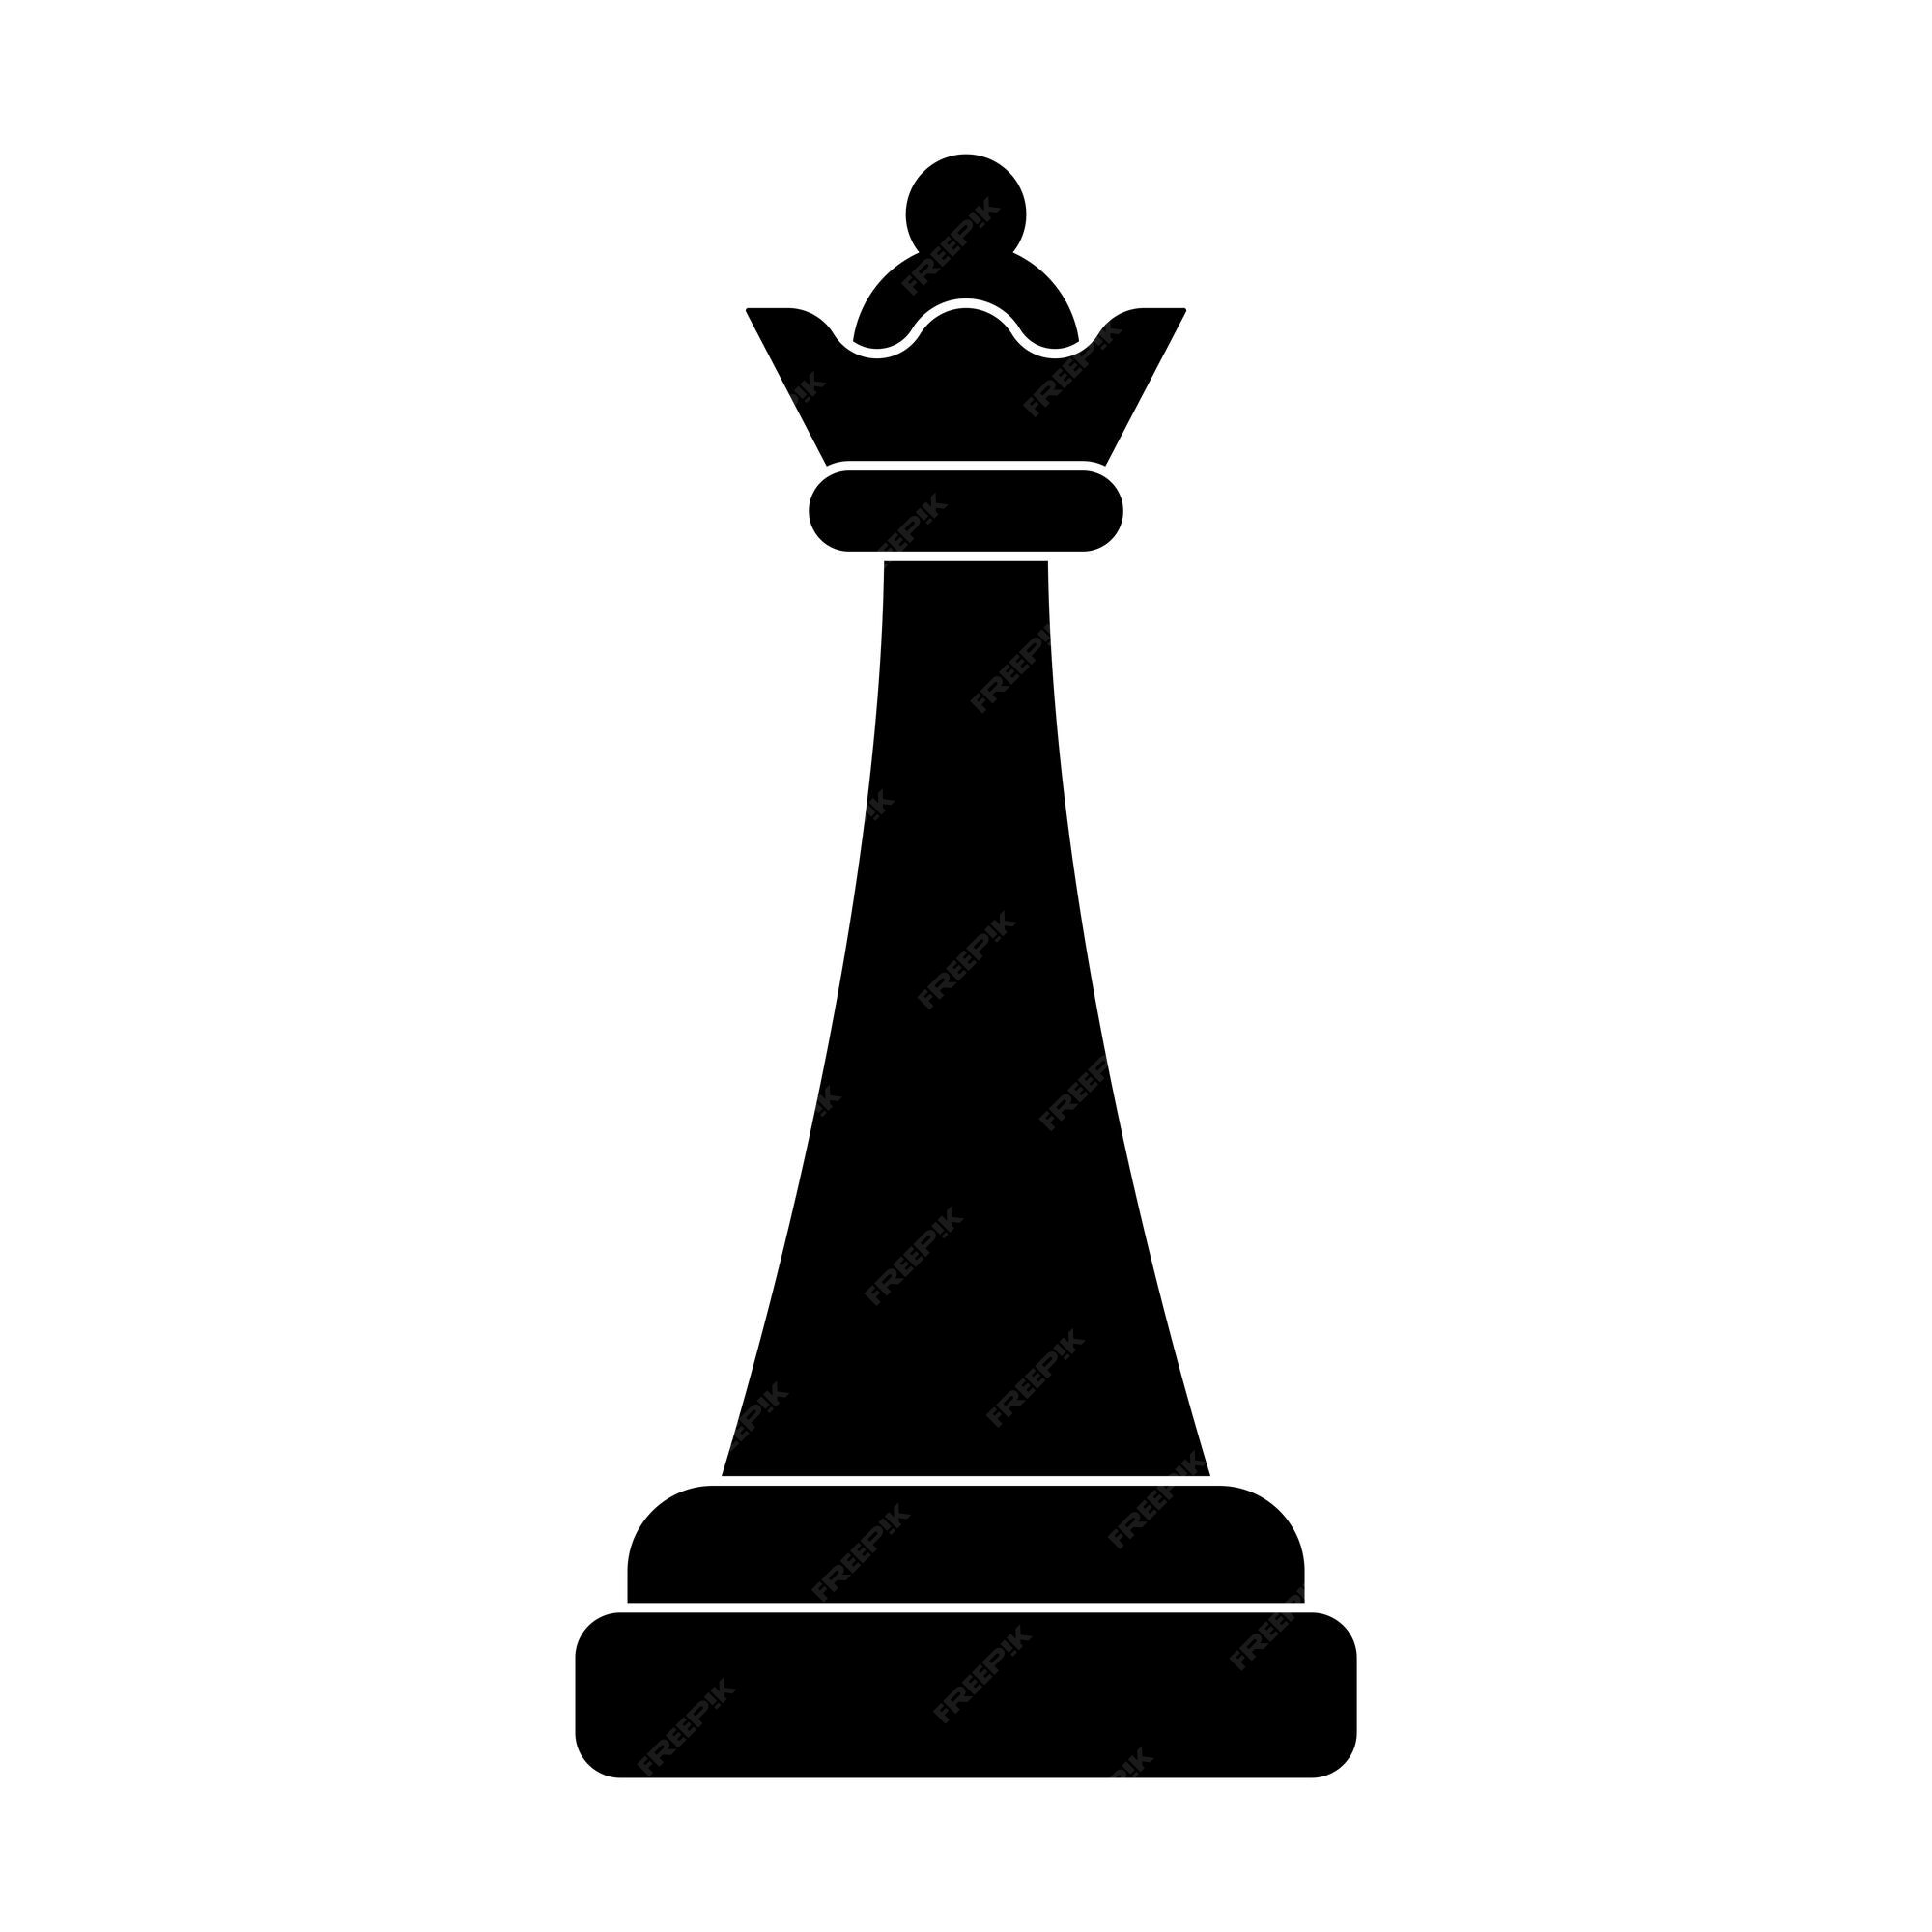 Chess Queen Line Icon In Flat Style Vector For Apps Ui Websites Black Icon  Vector Illustration Stock Illustration - Download Image Now - iStock